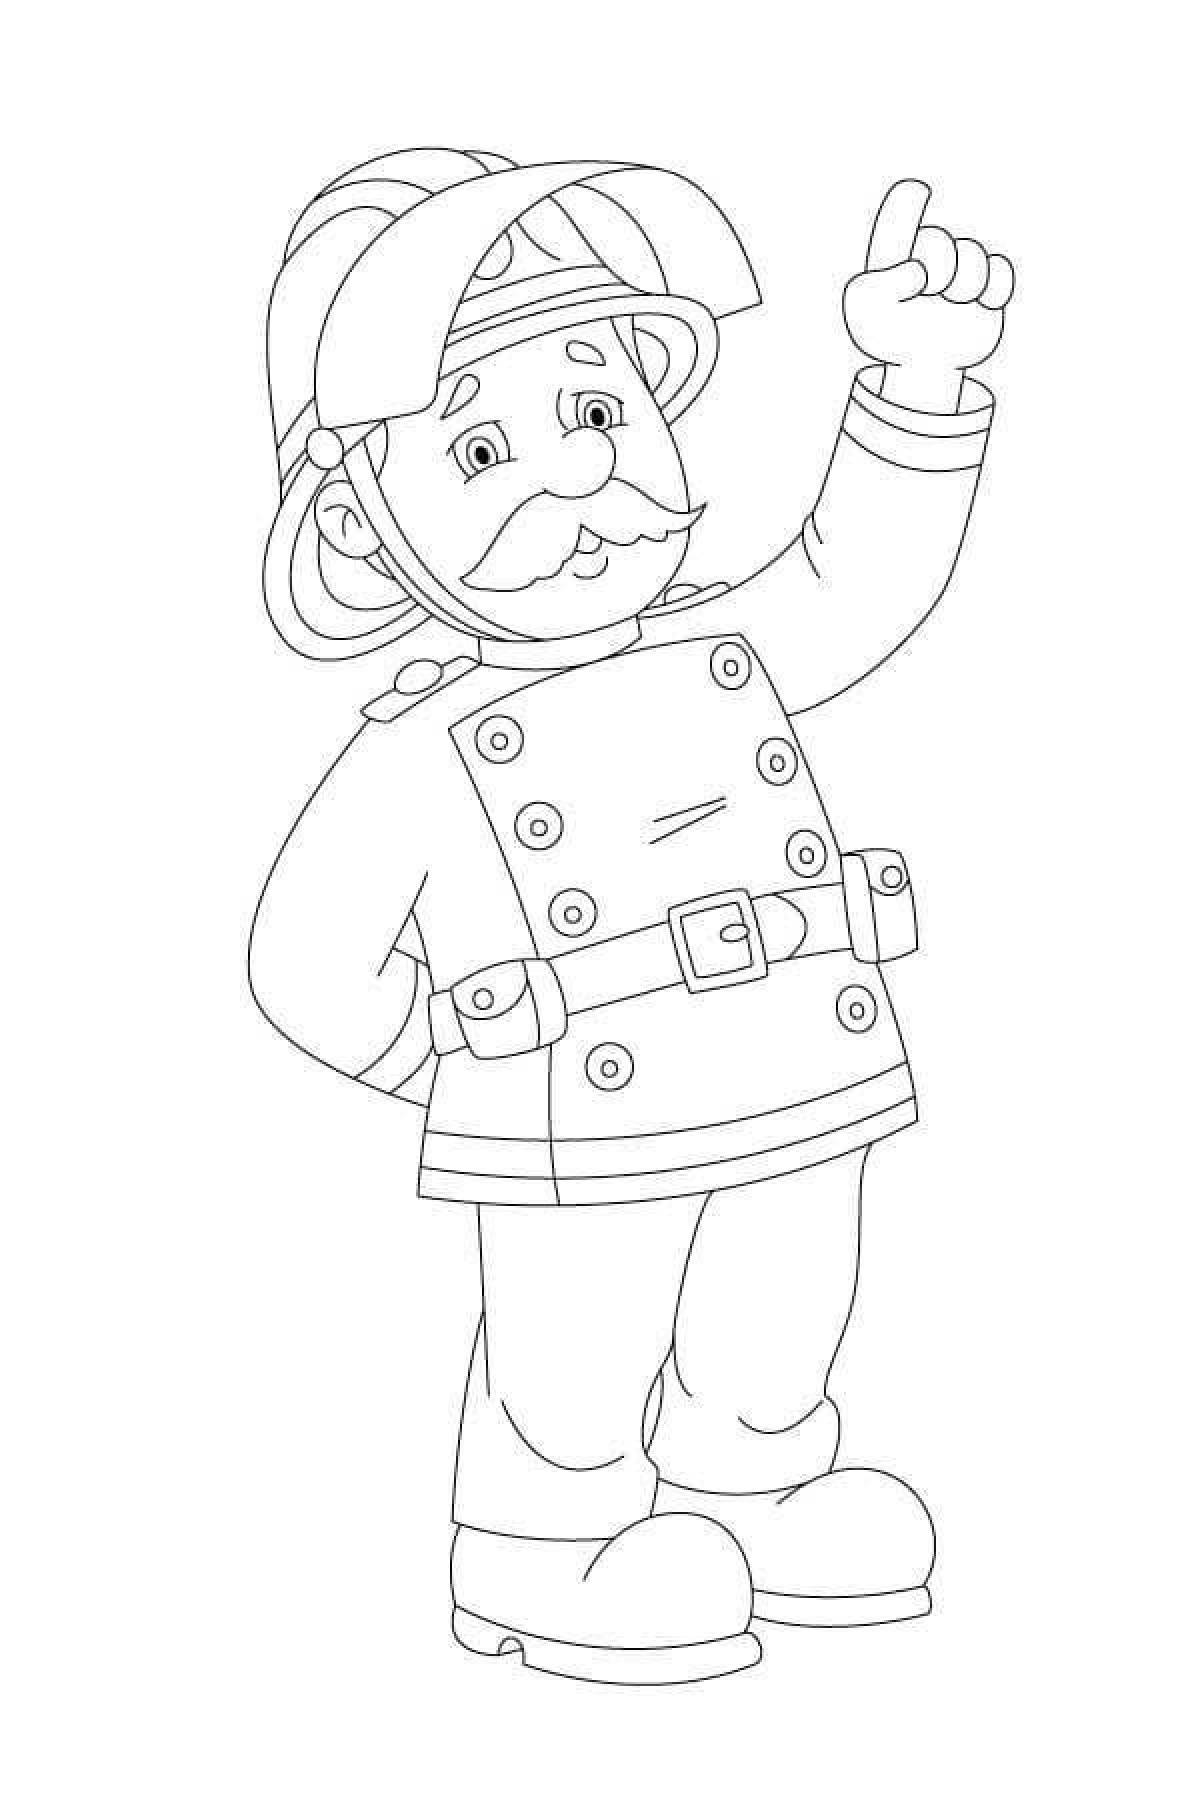 Fearless firefighter coloring page